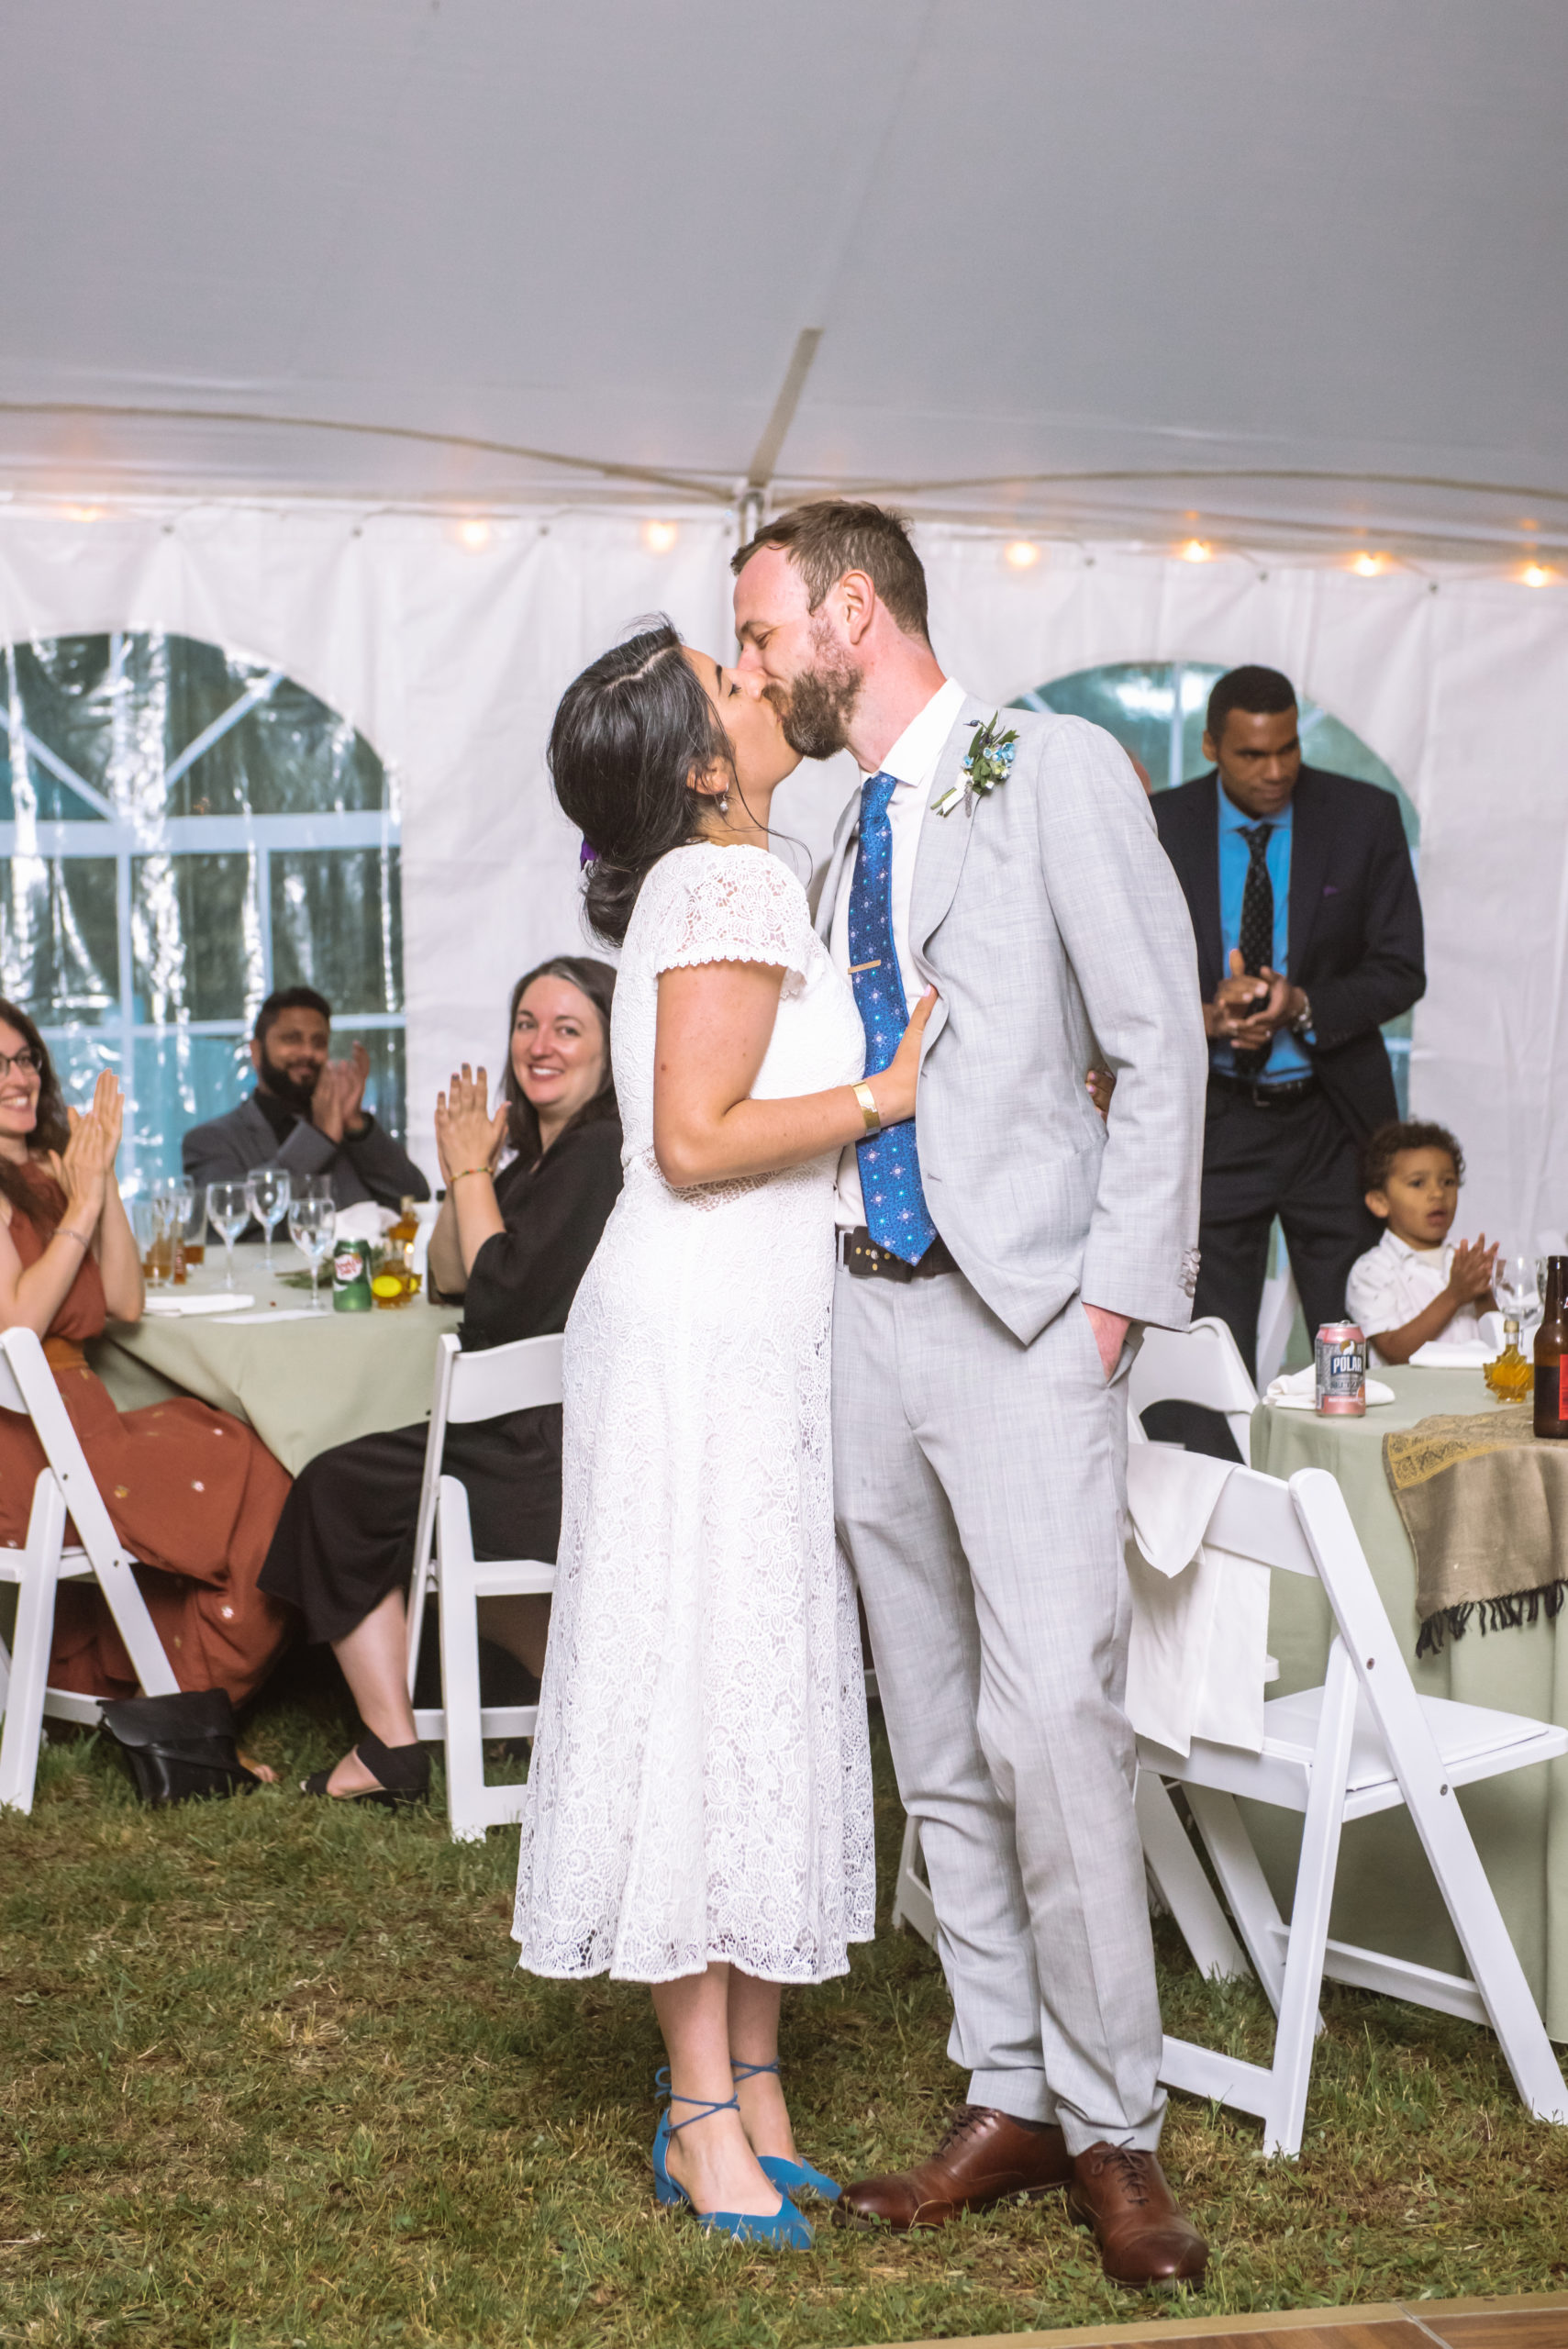 Bride and groom kissing during their reception. They are embracing face to face with the arms around each other. Both have their eyes closed. There are wedding guests clapping in the background.